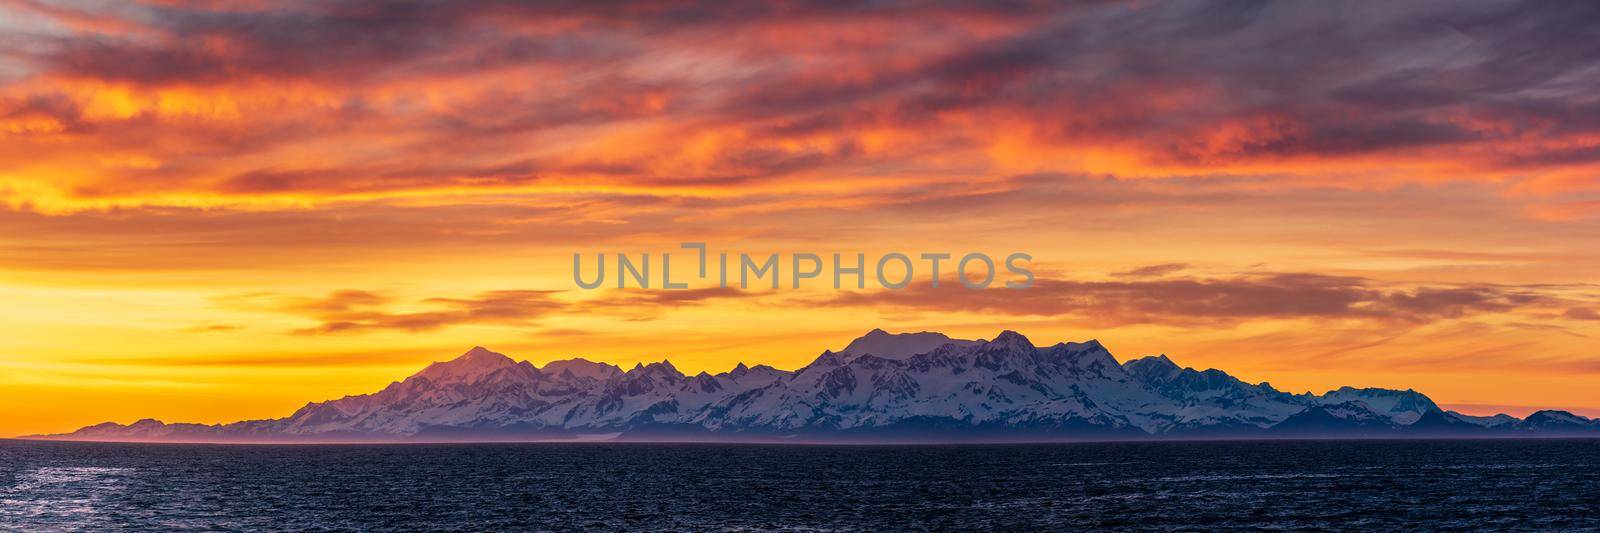 Sunset by Mt Fairweather and the Glacier Bay National Park in Alaska by steheap